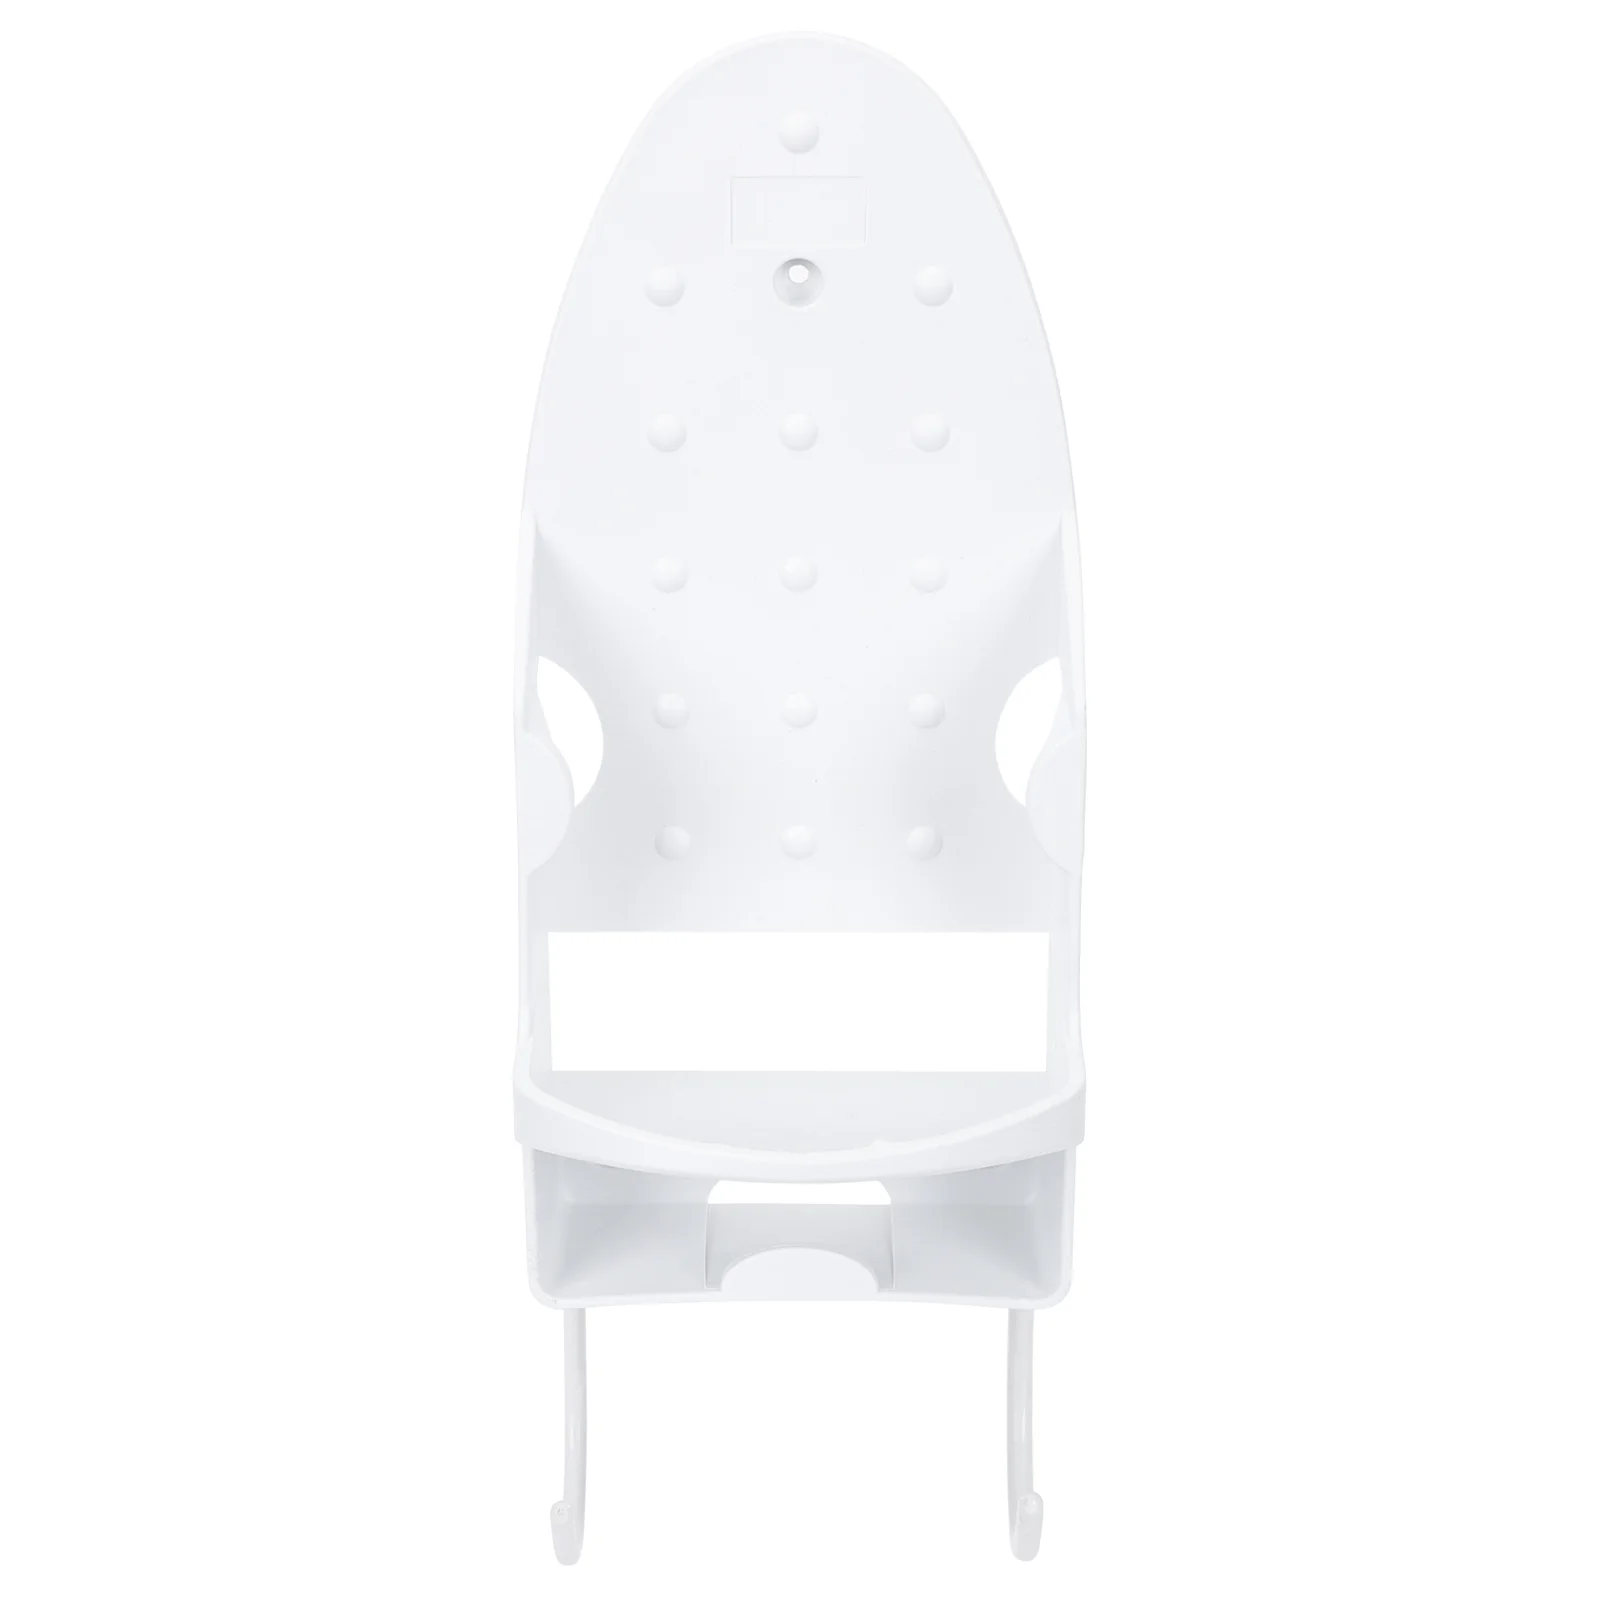 

Ironing Board Stand Metal Brackets Electric Holder Hanger Storage Wall Mount Shelf Hangers Pbt Two-in-One Table